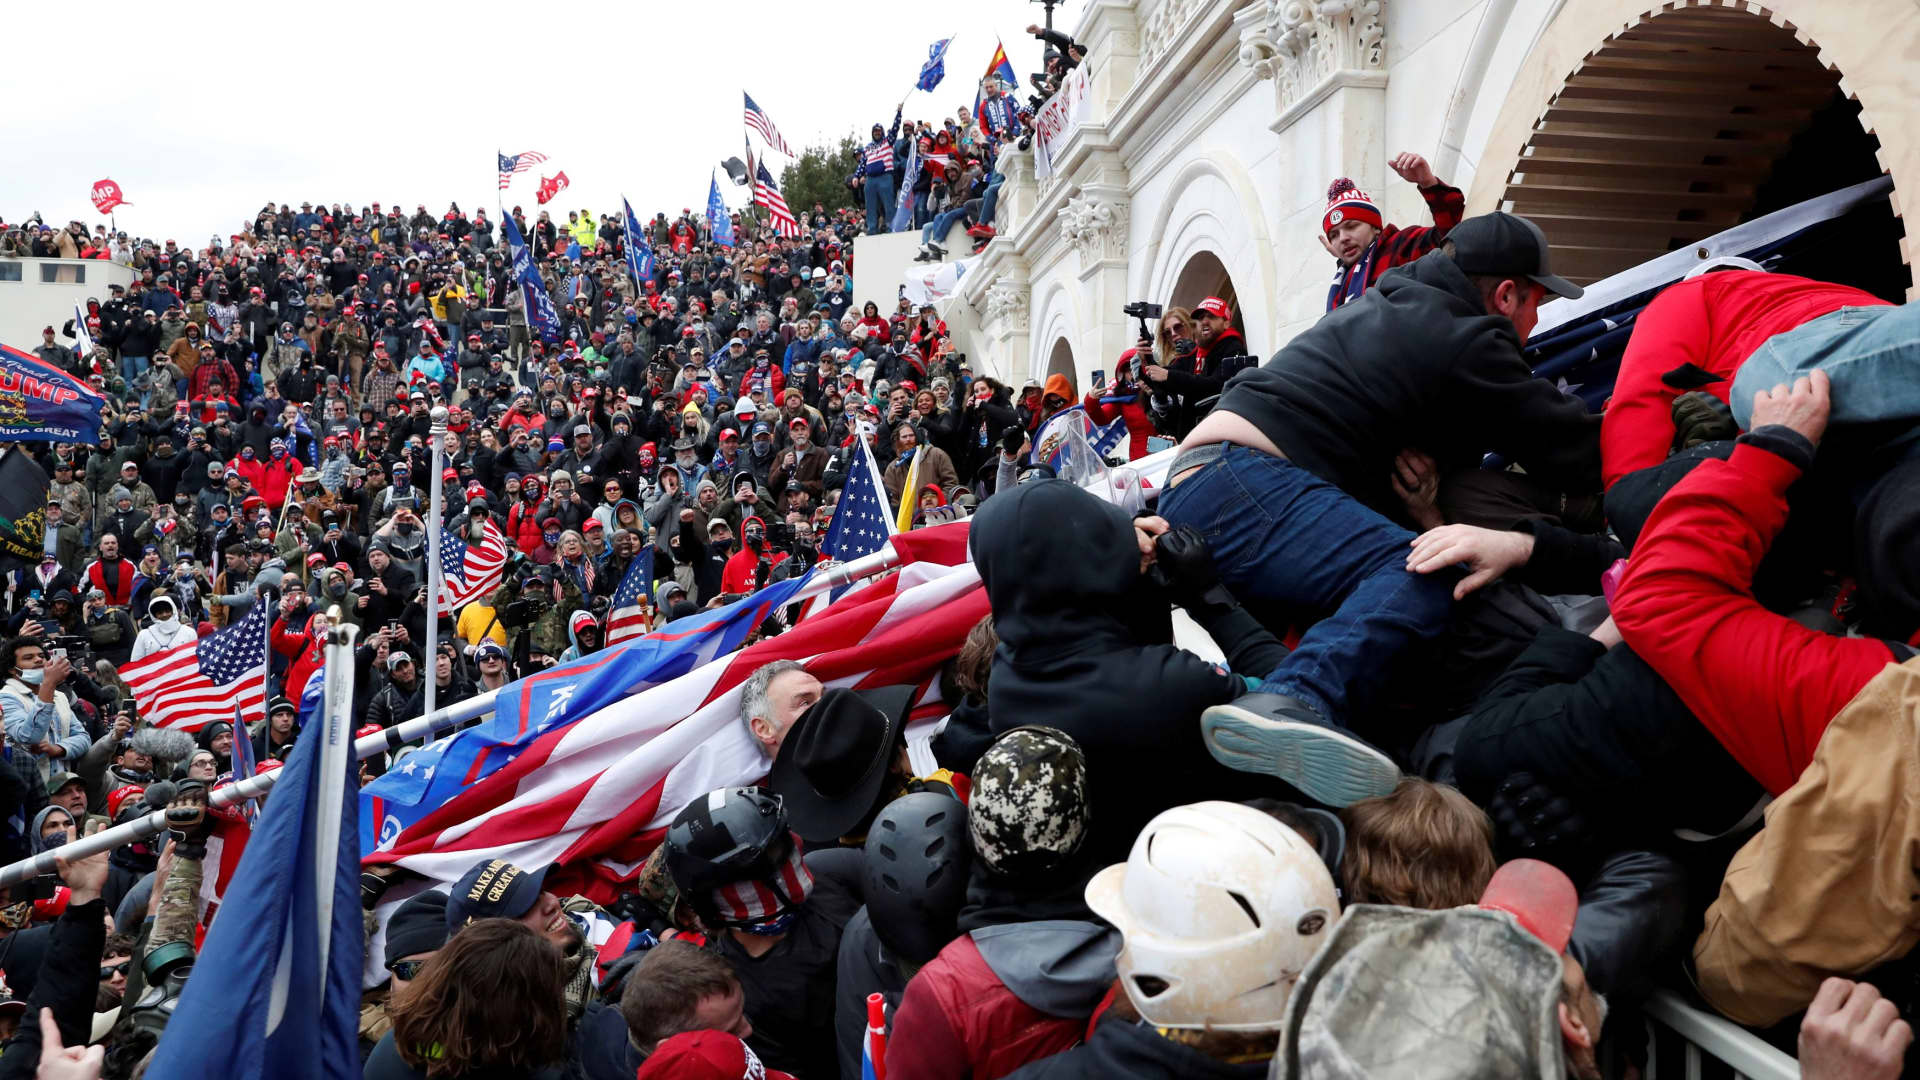 Pro-Trump protesters storm into the U.S. Capitol during clashes with police, during a rally to contest the certification of the 2020 U.S. presidential election results by the U.S. Congress, in Washington, U.S, January 6, 2021.